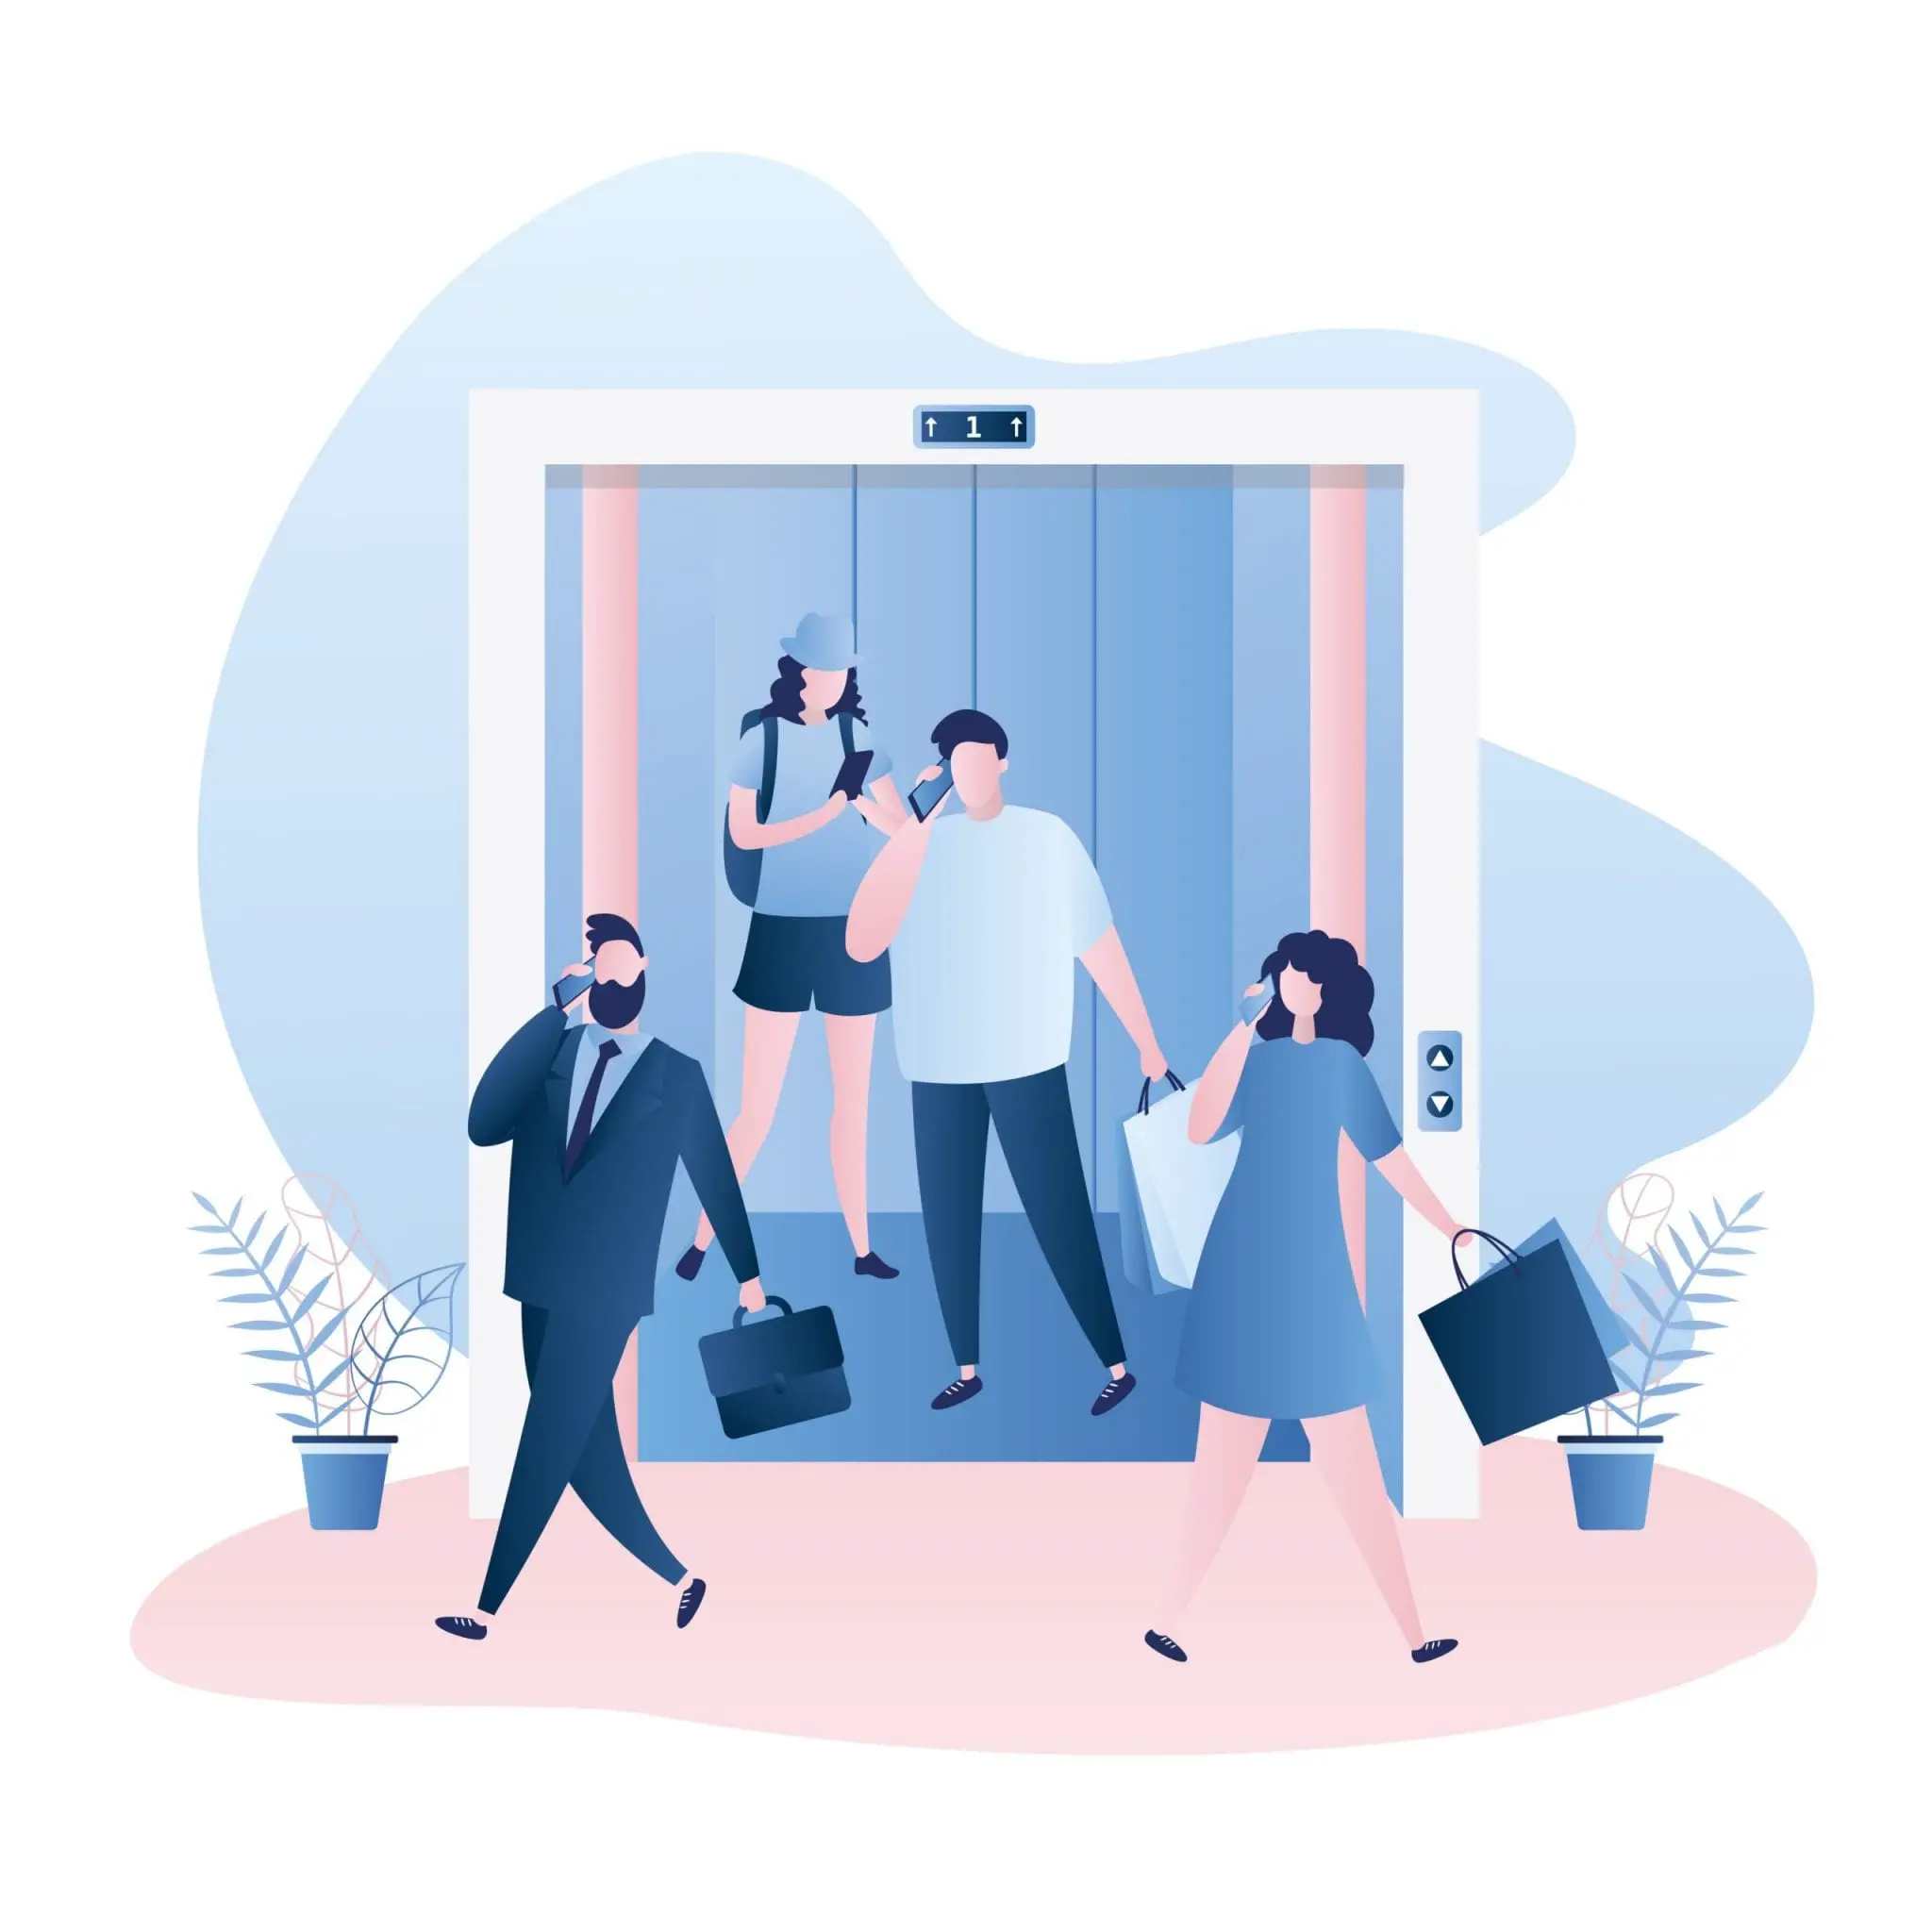 Elevator or Lift With Open Doors, Different People in the Elevator and Around, Business and Shopping Characters Illustration